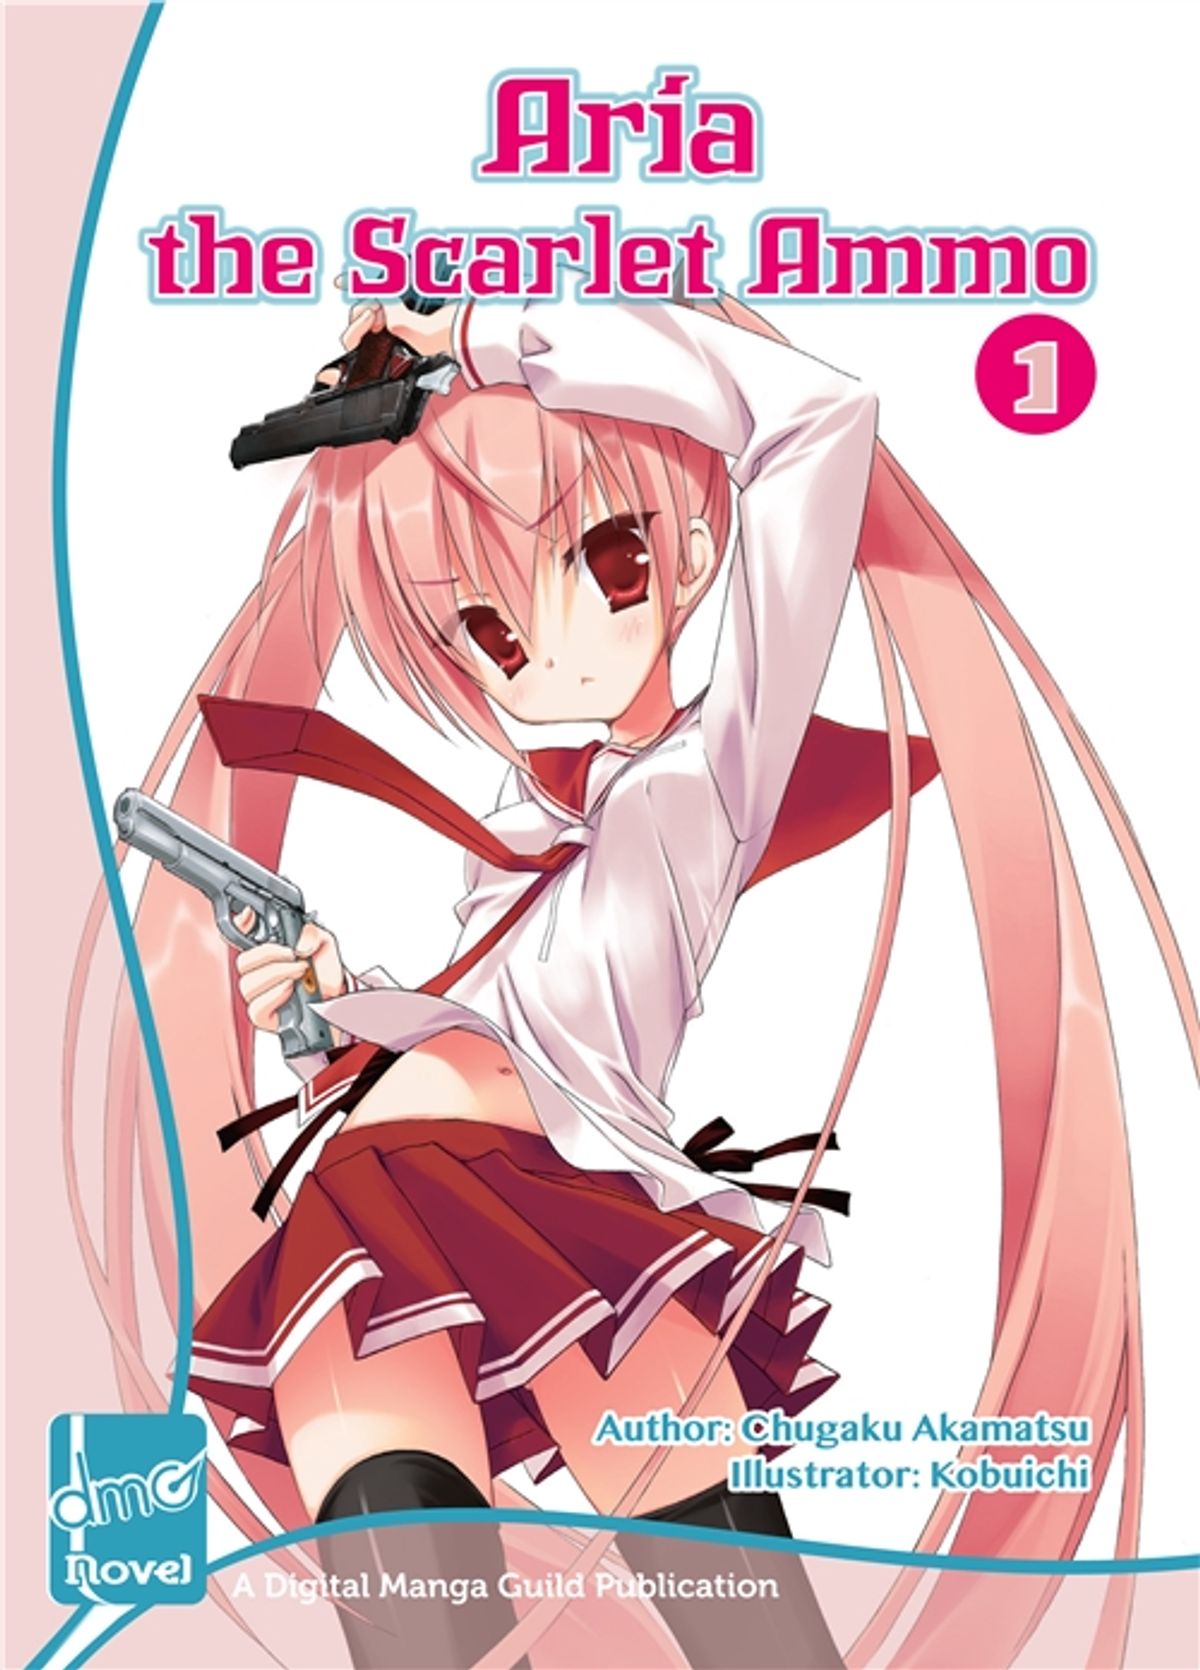 Aria the scarlet ammo episode 2 download pc